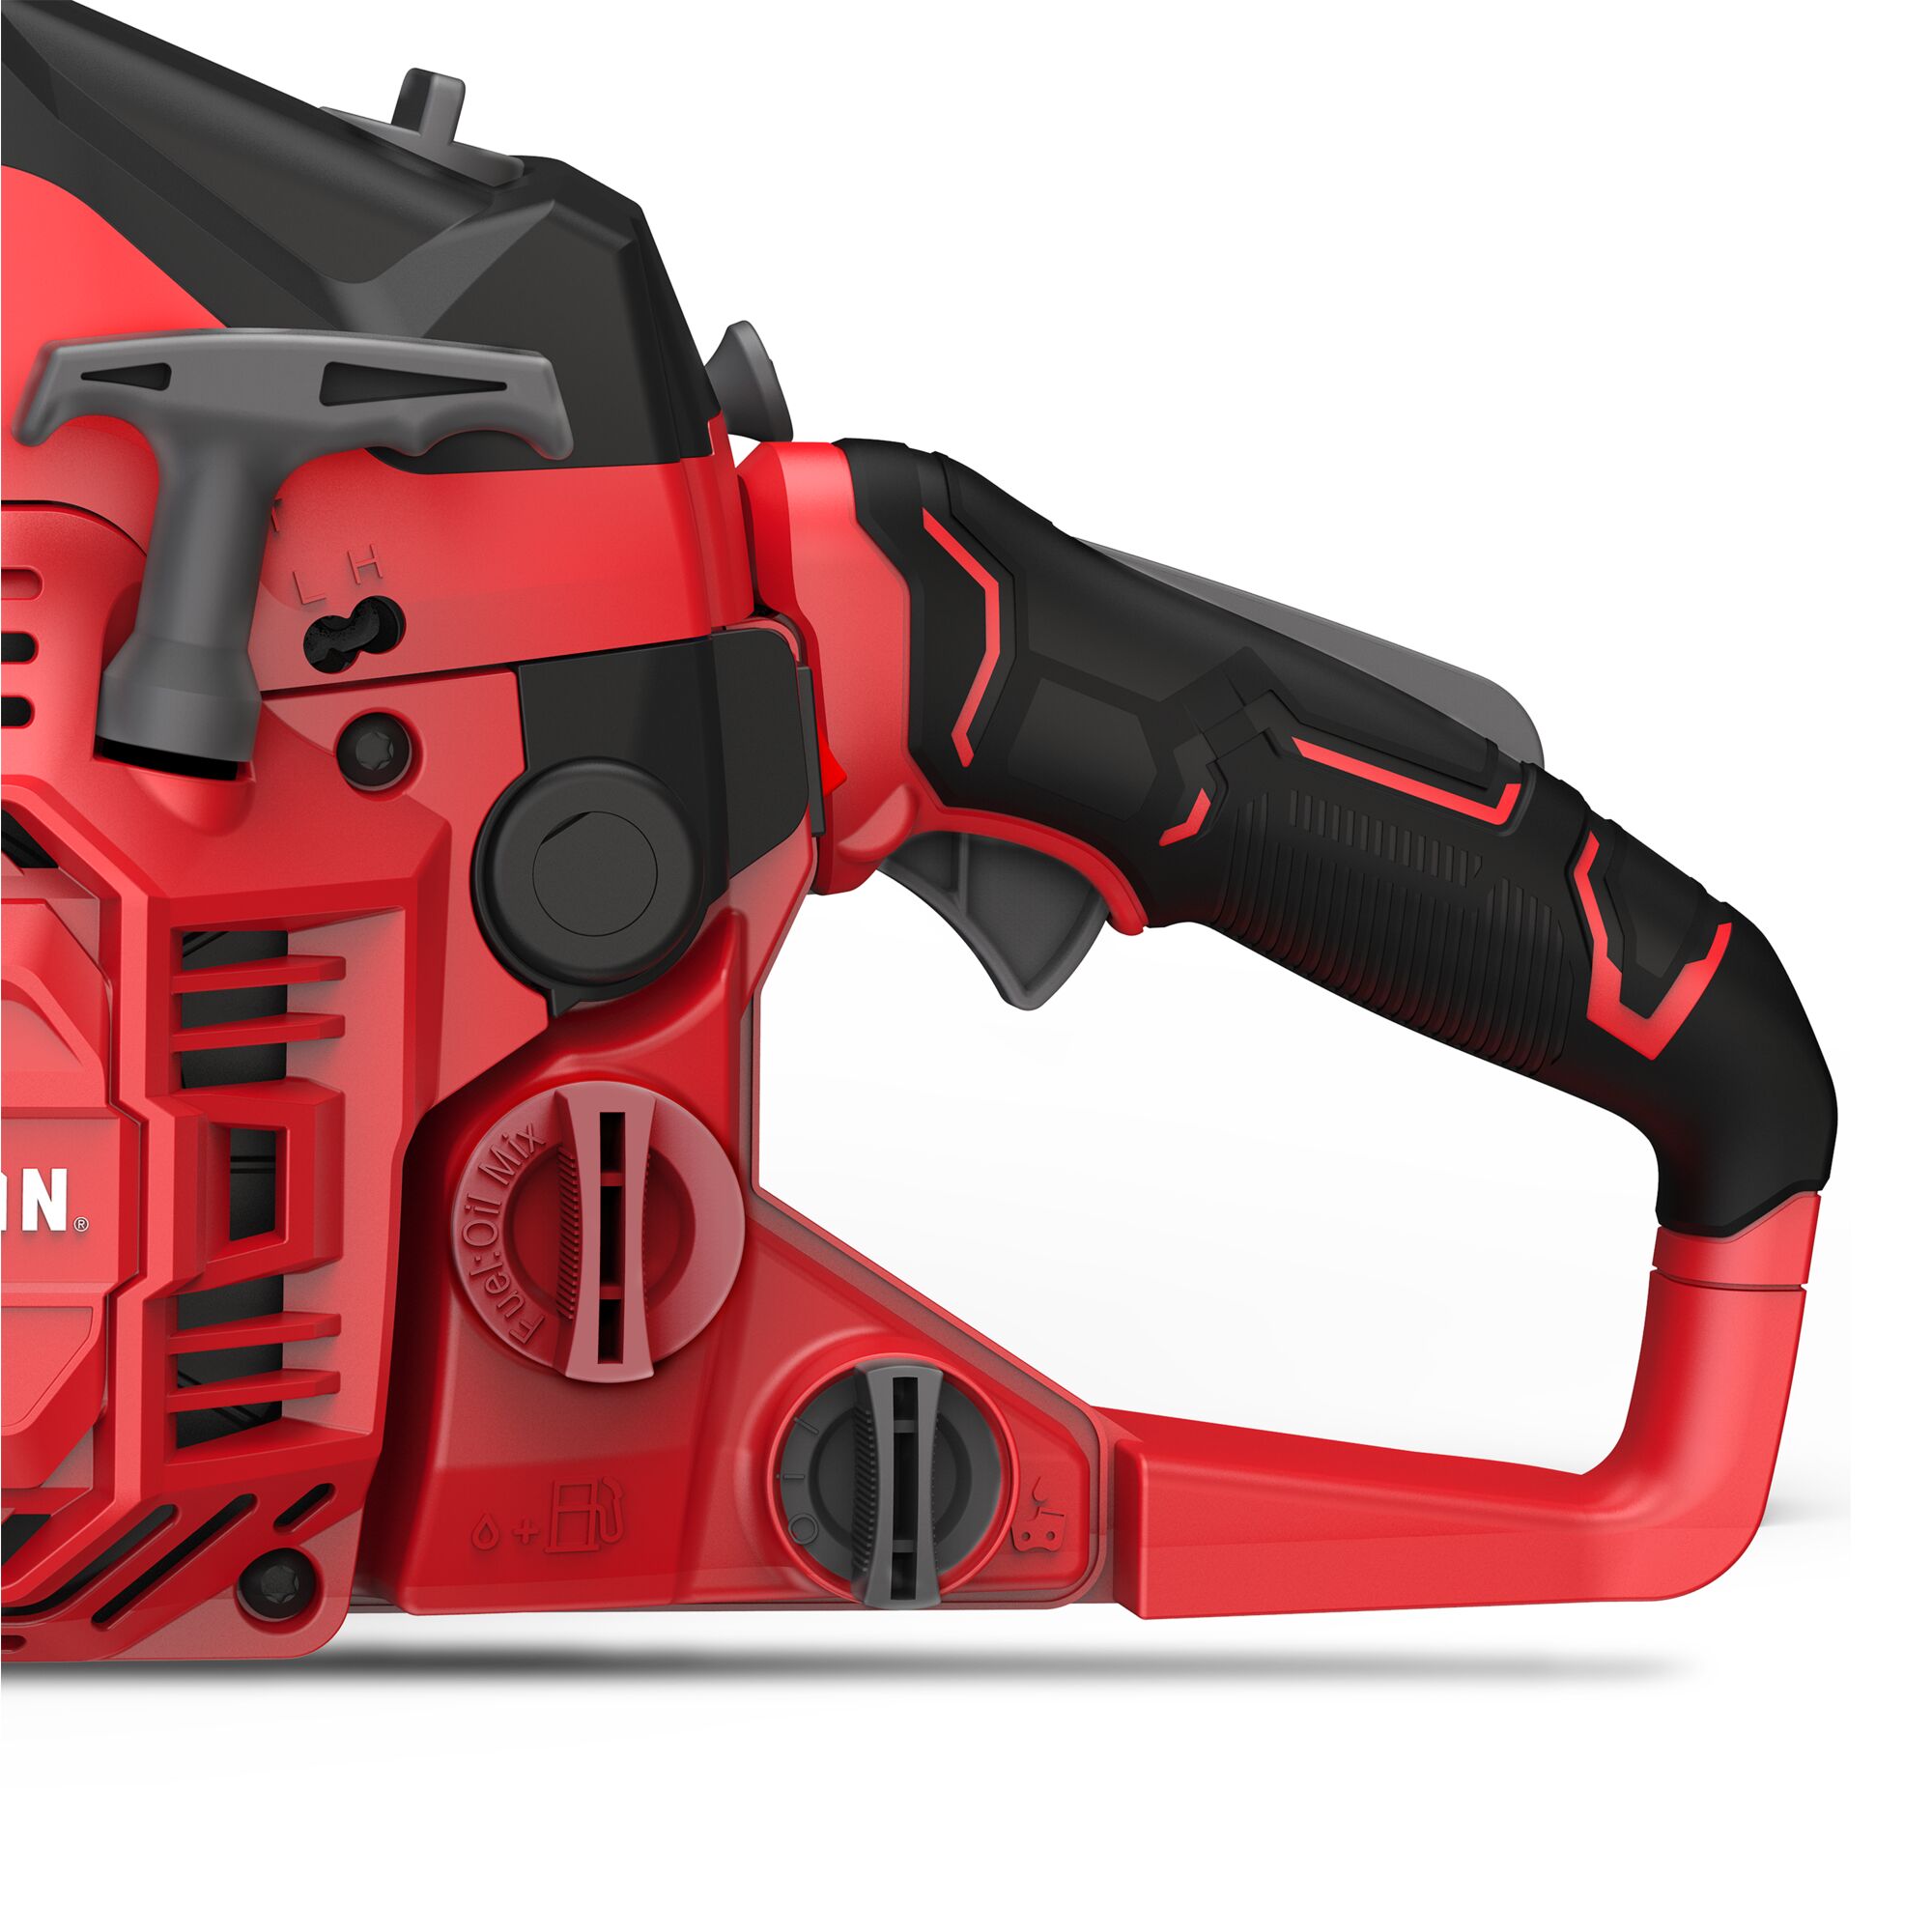 View of CRAFTSMAN Chain Saws highlighting product features